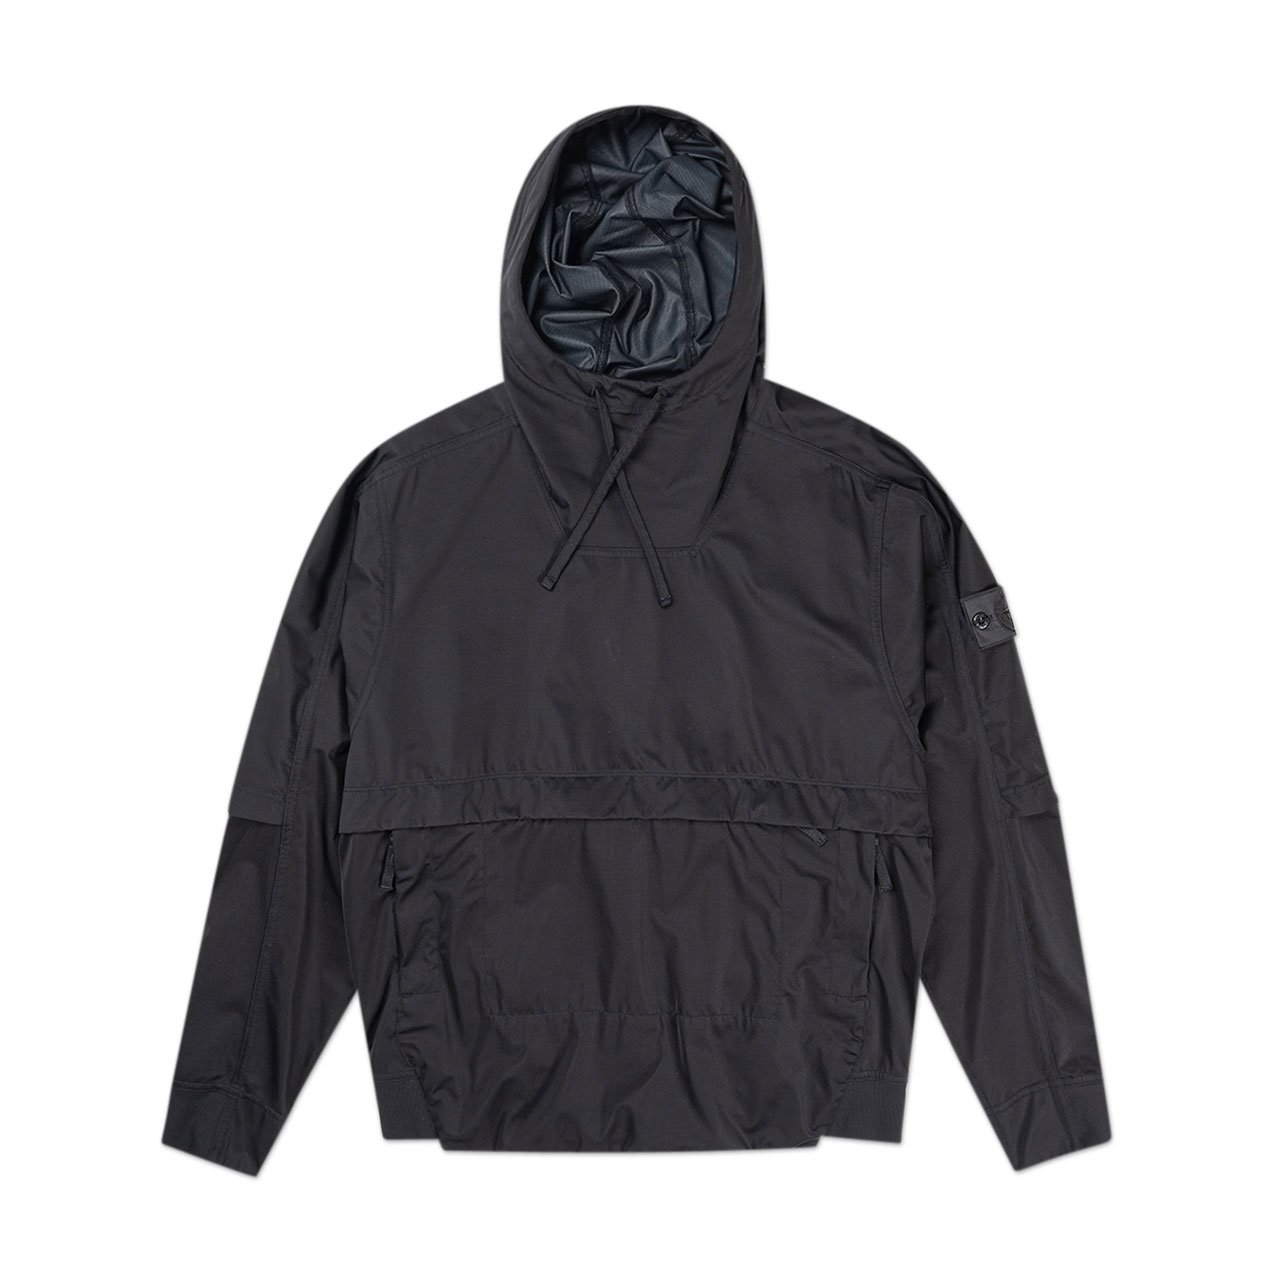 stone island shadow project packable anorak (black) - 721940504.v0029 - a.plus - Image - 1